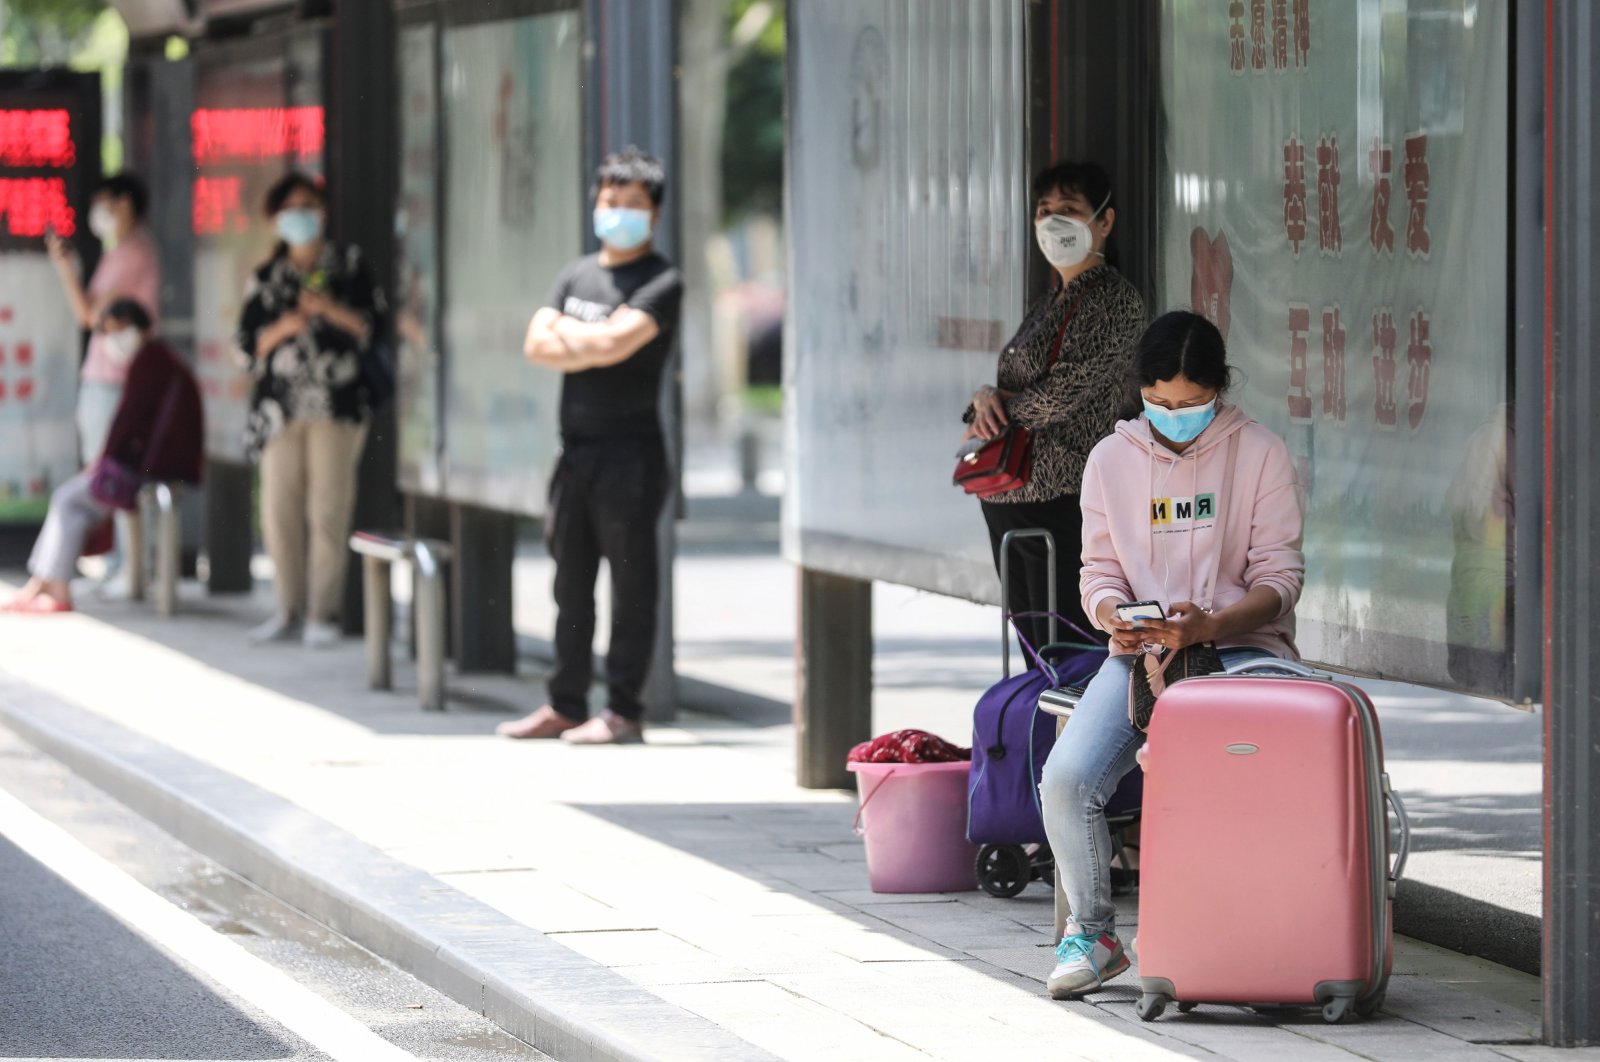 People wait at a bus station in Wuhan in China's central Hubei province on May 11, 2020. (AFP Photo)